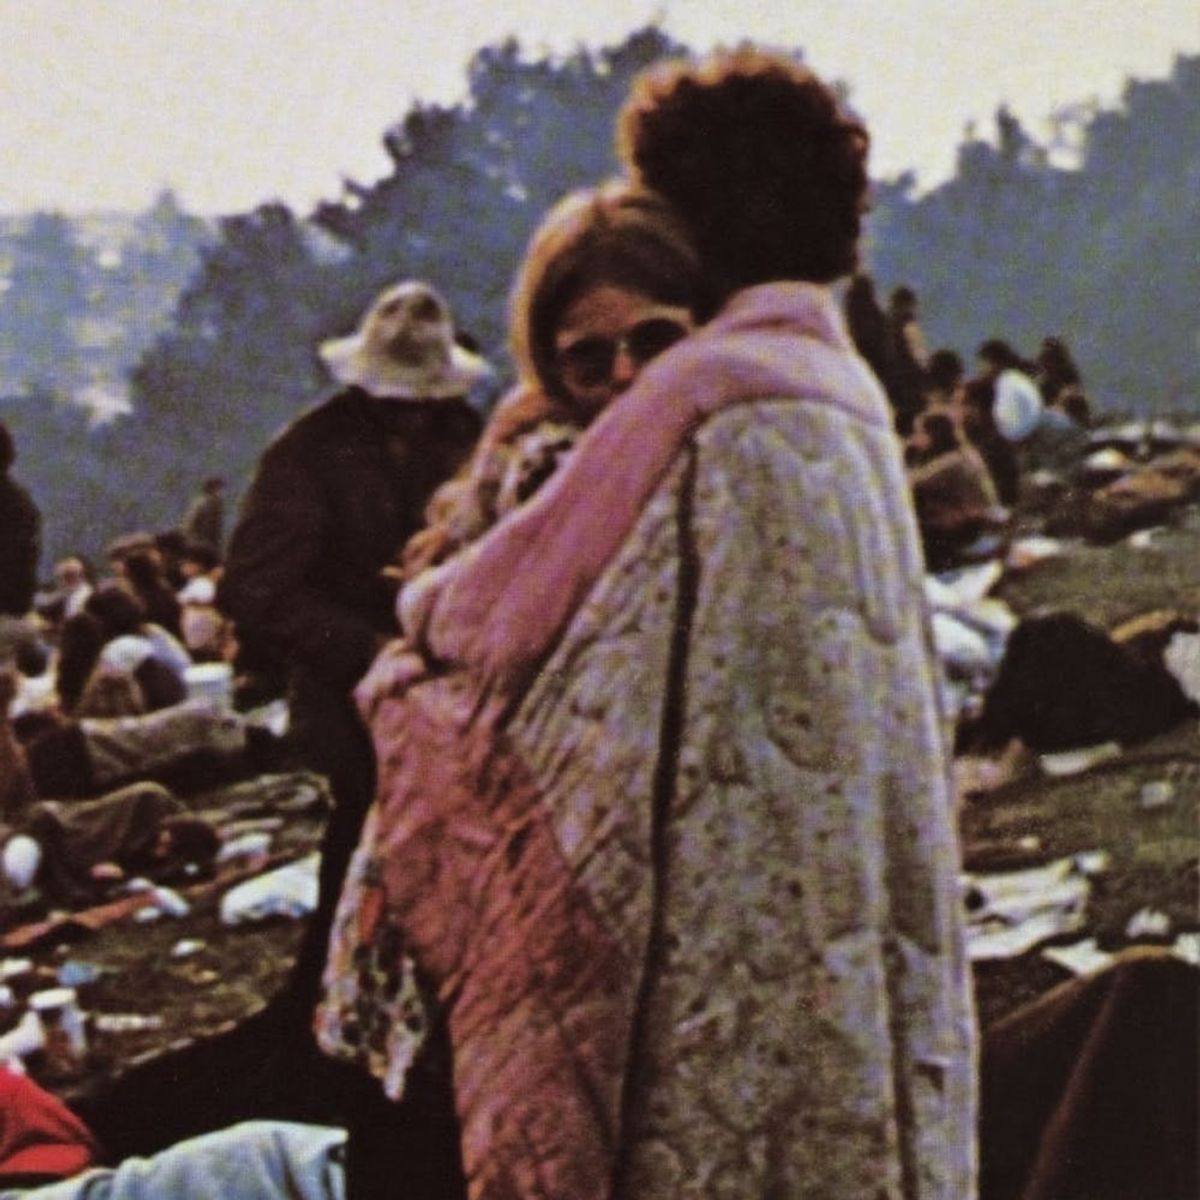 The Couple from the Woodstock Album Are Relationship Goals